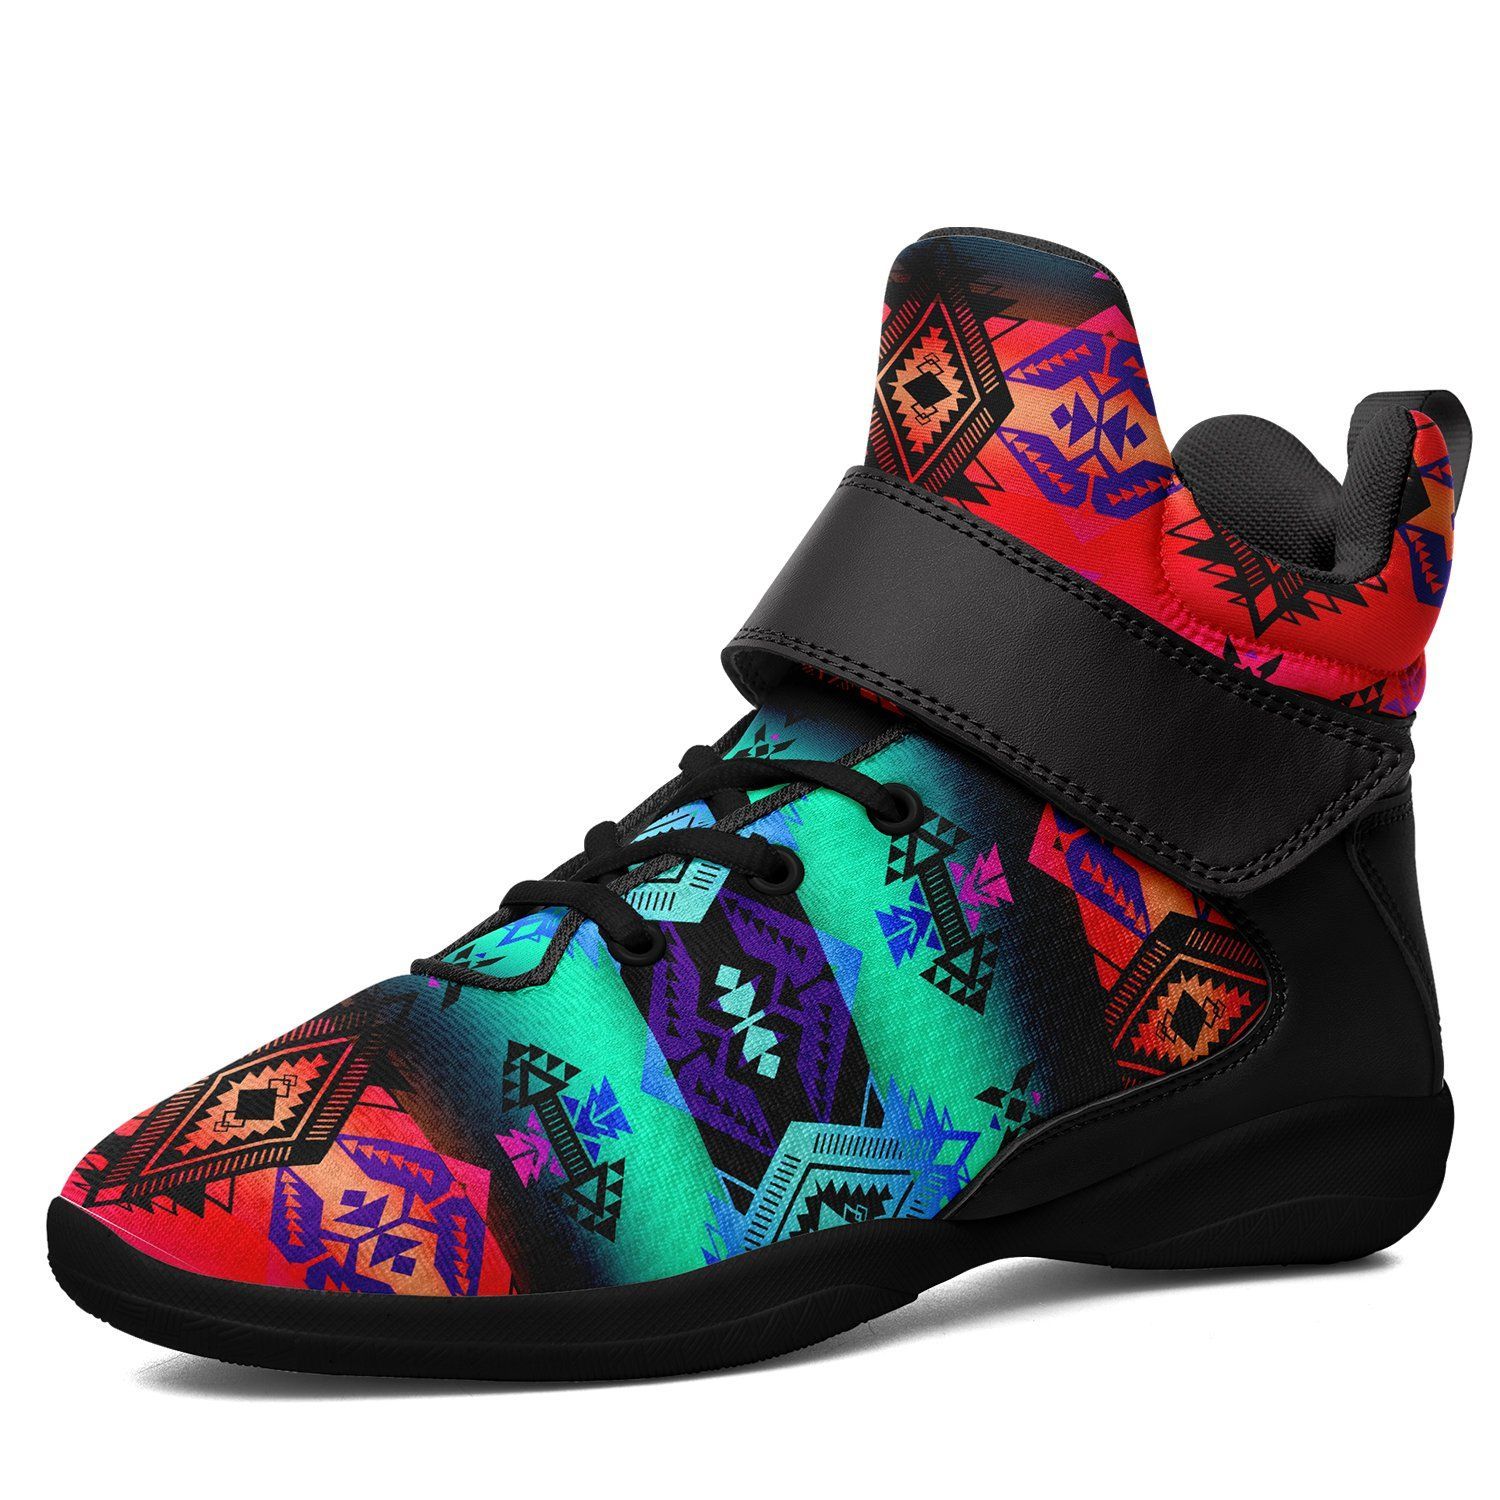 Sovereign Nation Sunrise Ipottaa Basketball / Sport High Top Shoes - Black Sole 49 Dzine US Men 7 / EUR 40 Black Sole with Black Strap 